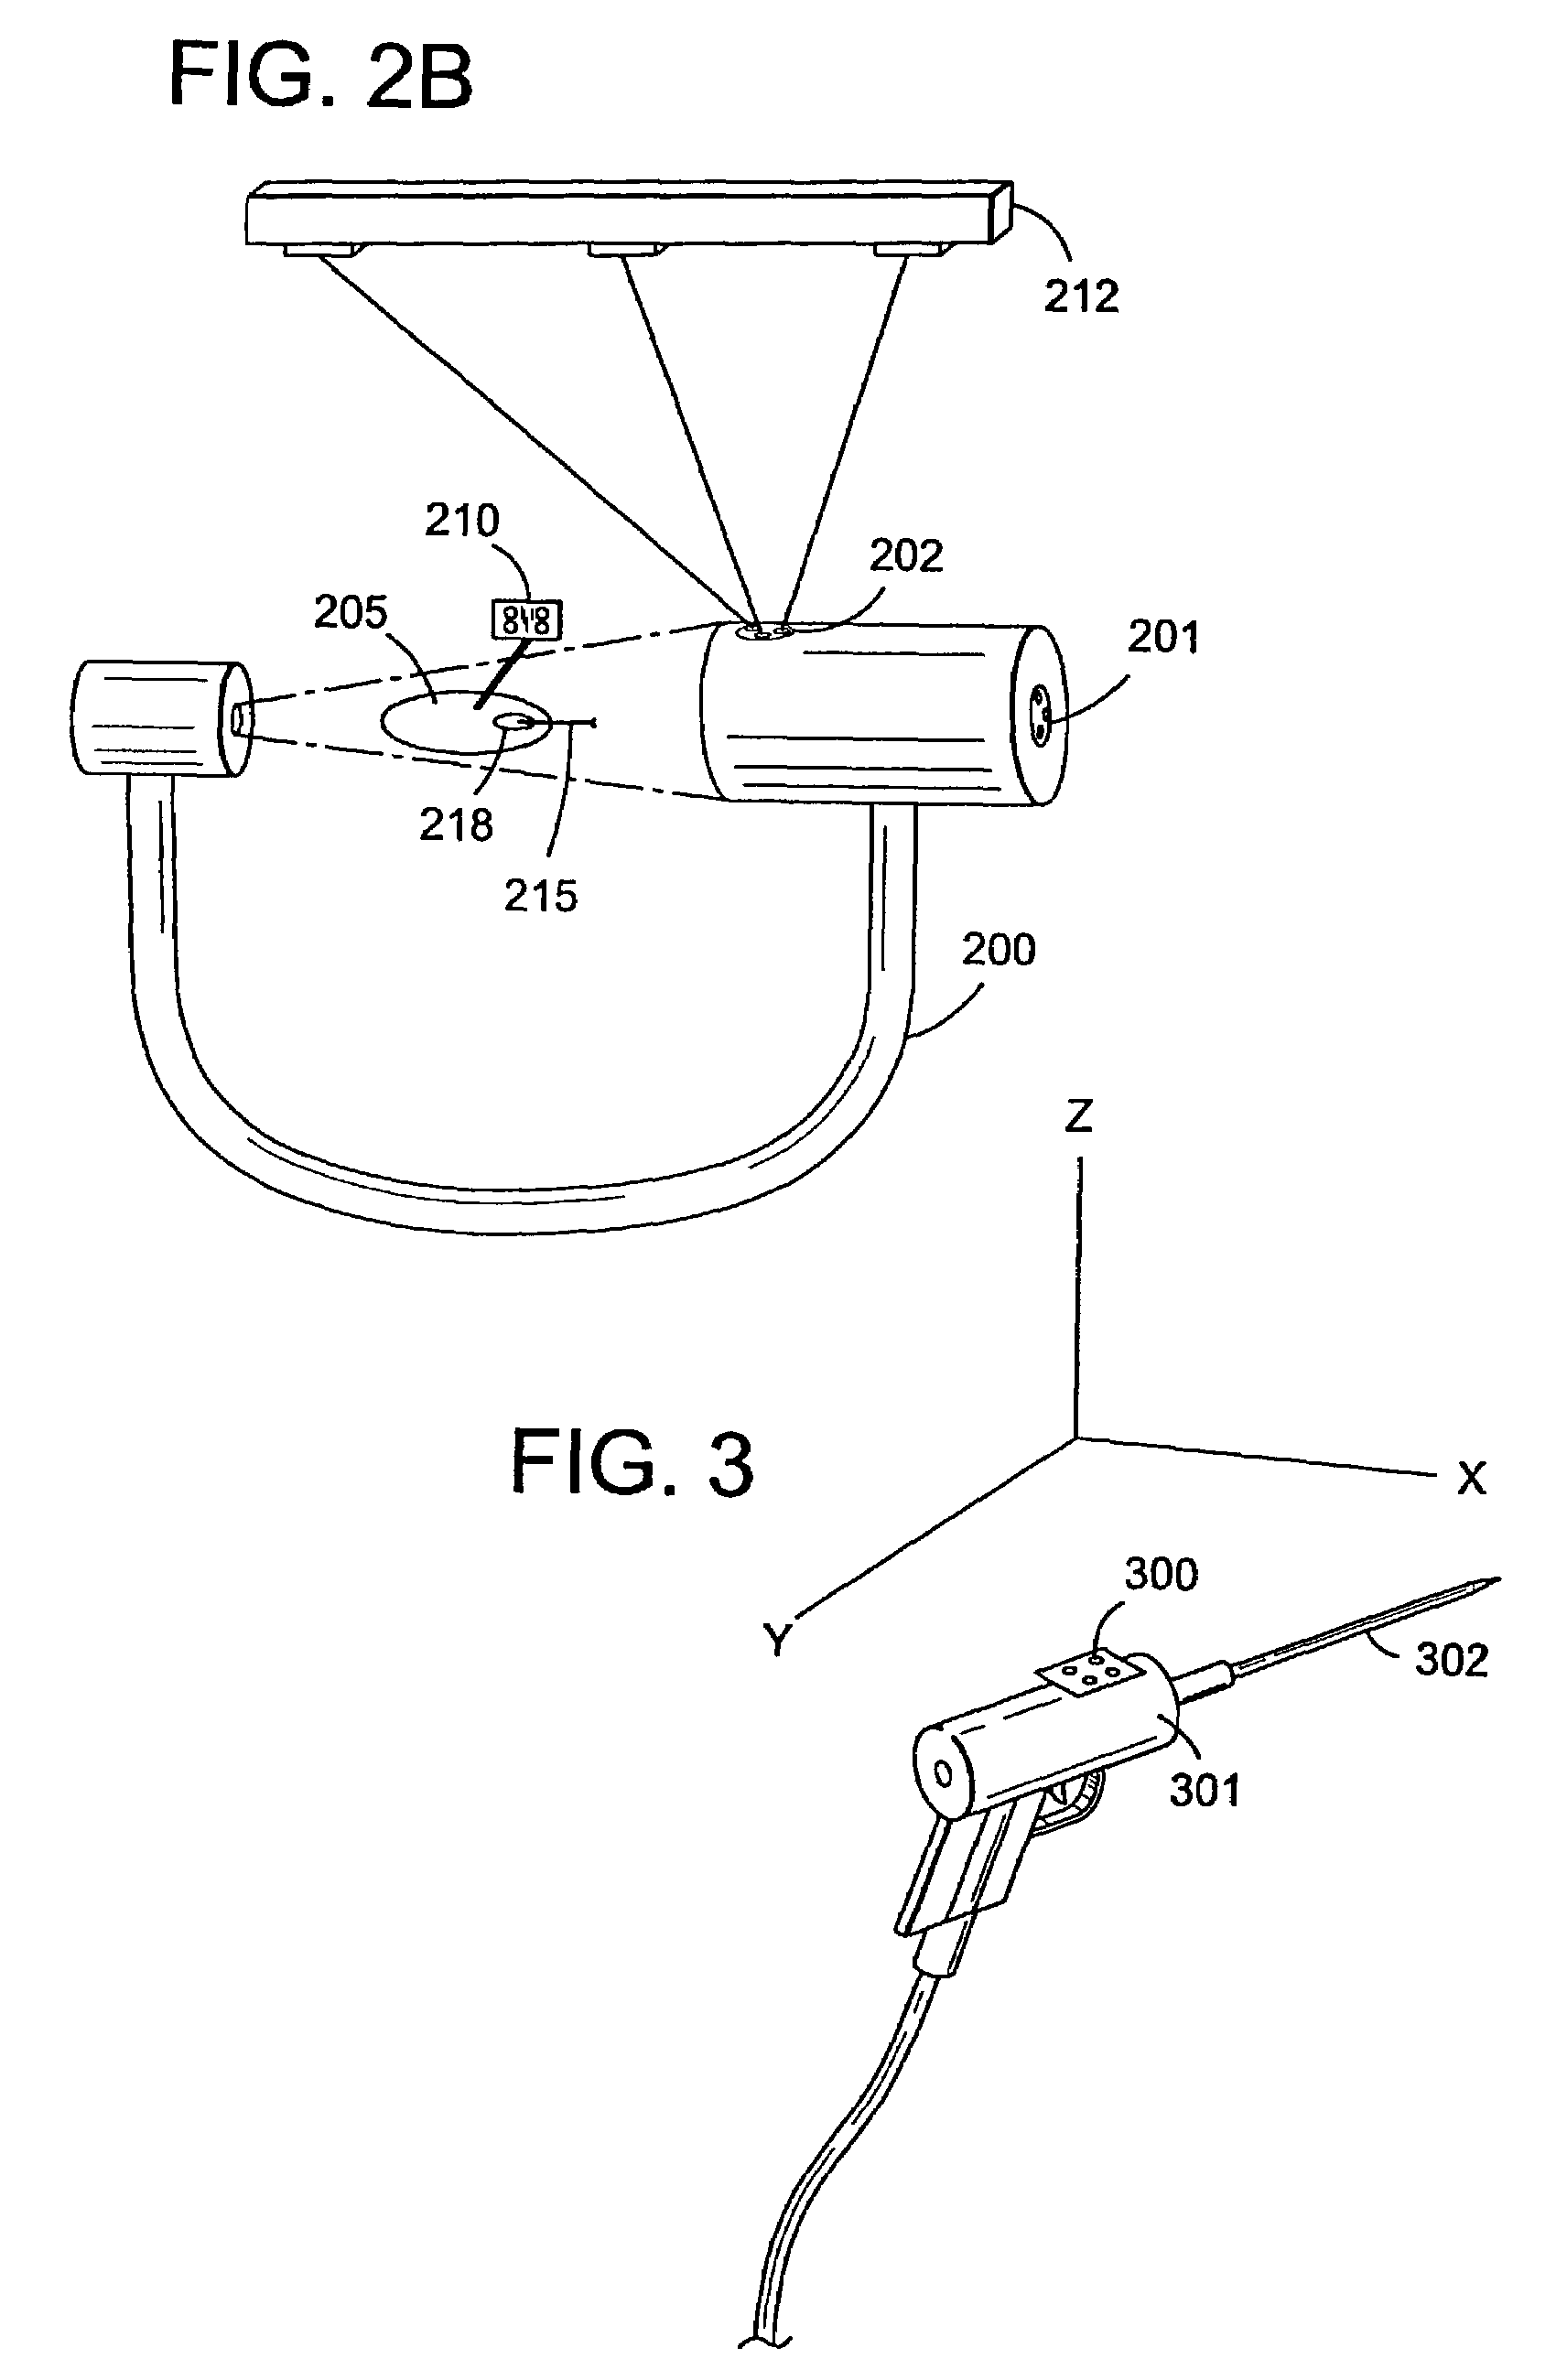 Fluoroscopic image guided orthopaedic surgery system with intraoperative registration